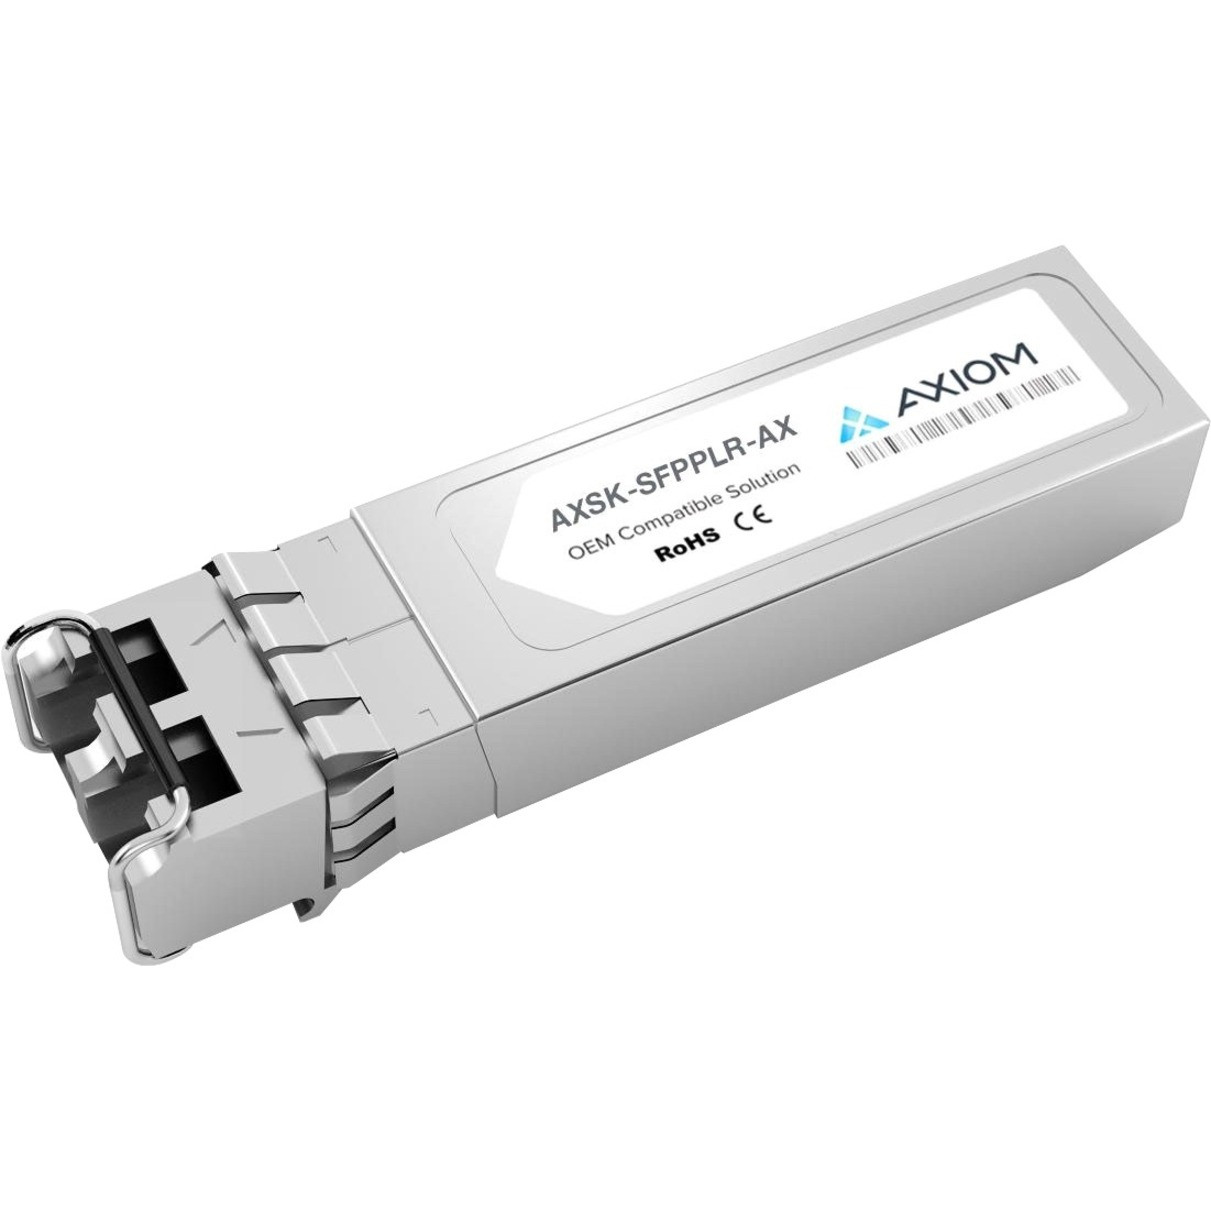 Axiom Memory Solutions 10GBASE-LR SFP+ Transceiver for A10 NetworksAXSK-SFP+LRFor Optical Network, Data Networking1 x 10GBase-LROptical Fiber… AXSK-SFPPLR-AX